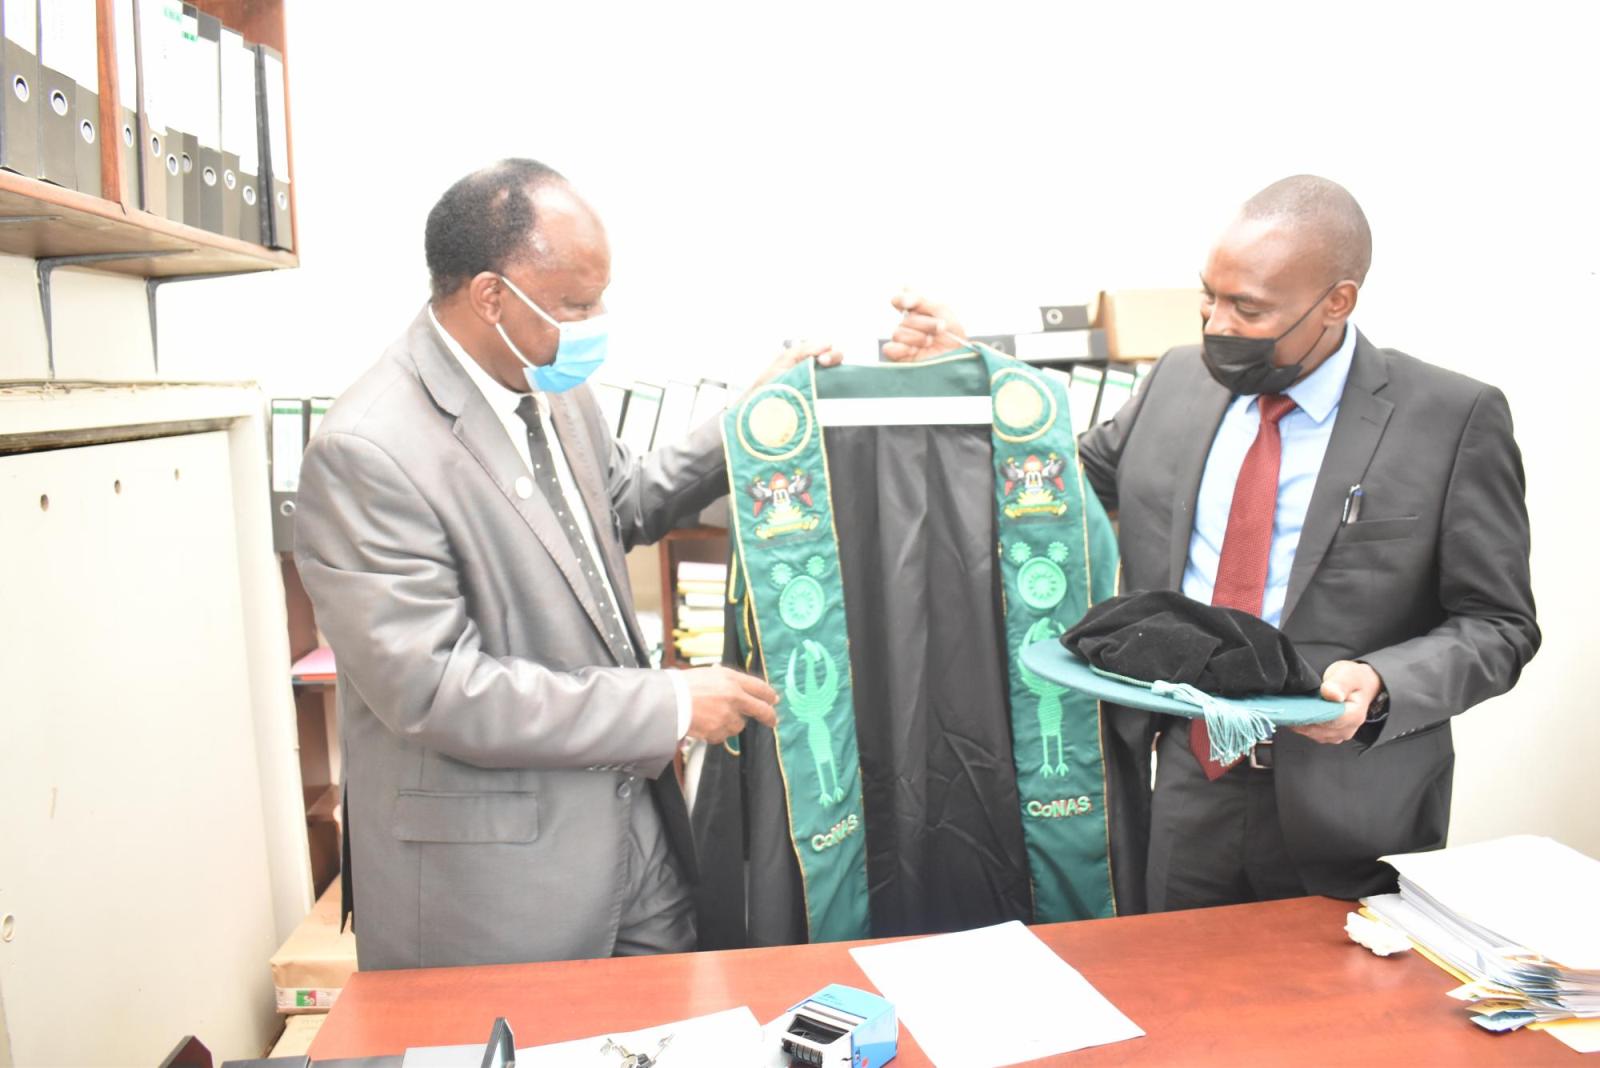 The outgoing Deputy Principal, CoNAS, Prof. Fredrick Jones Muyodi (L) hands over the ceremonial gown of the Deputy Principal CoNAS to the Principal, Dr Tumps Winston Ireeta during the ceremony on 7th March 2022.